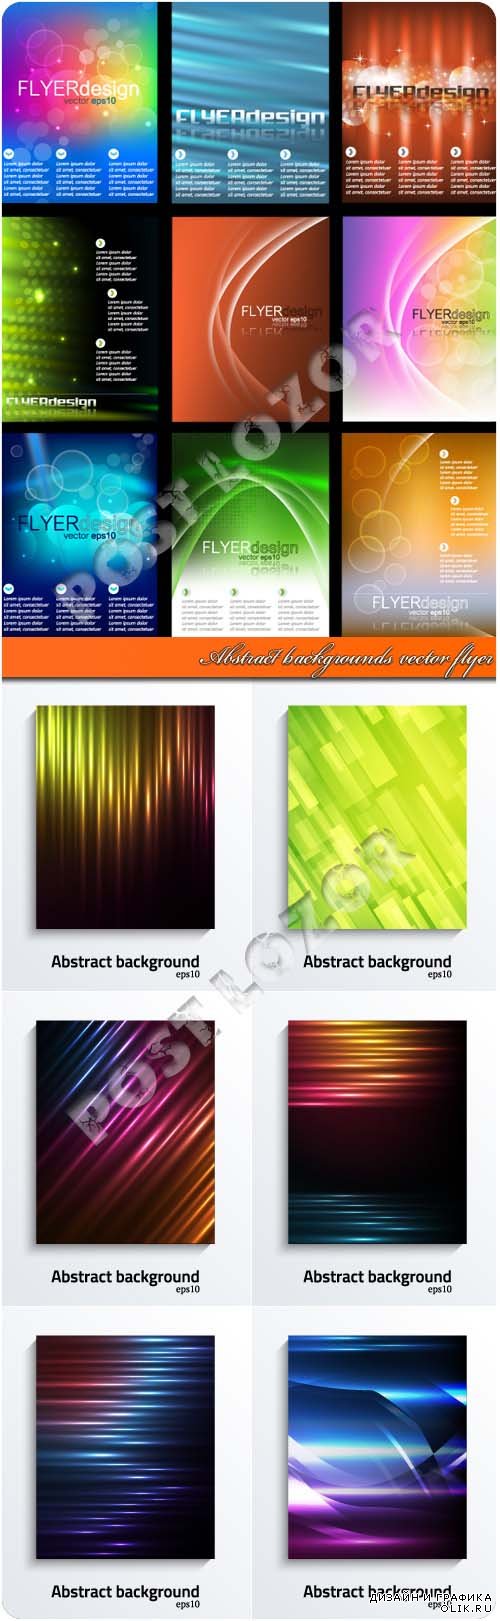 Abstract backgrounds vector flyer